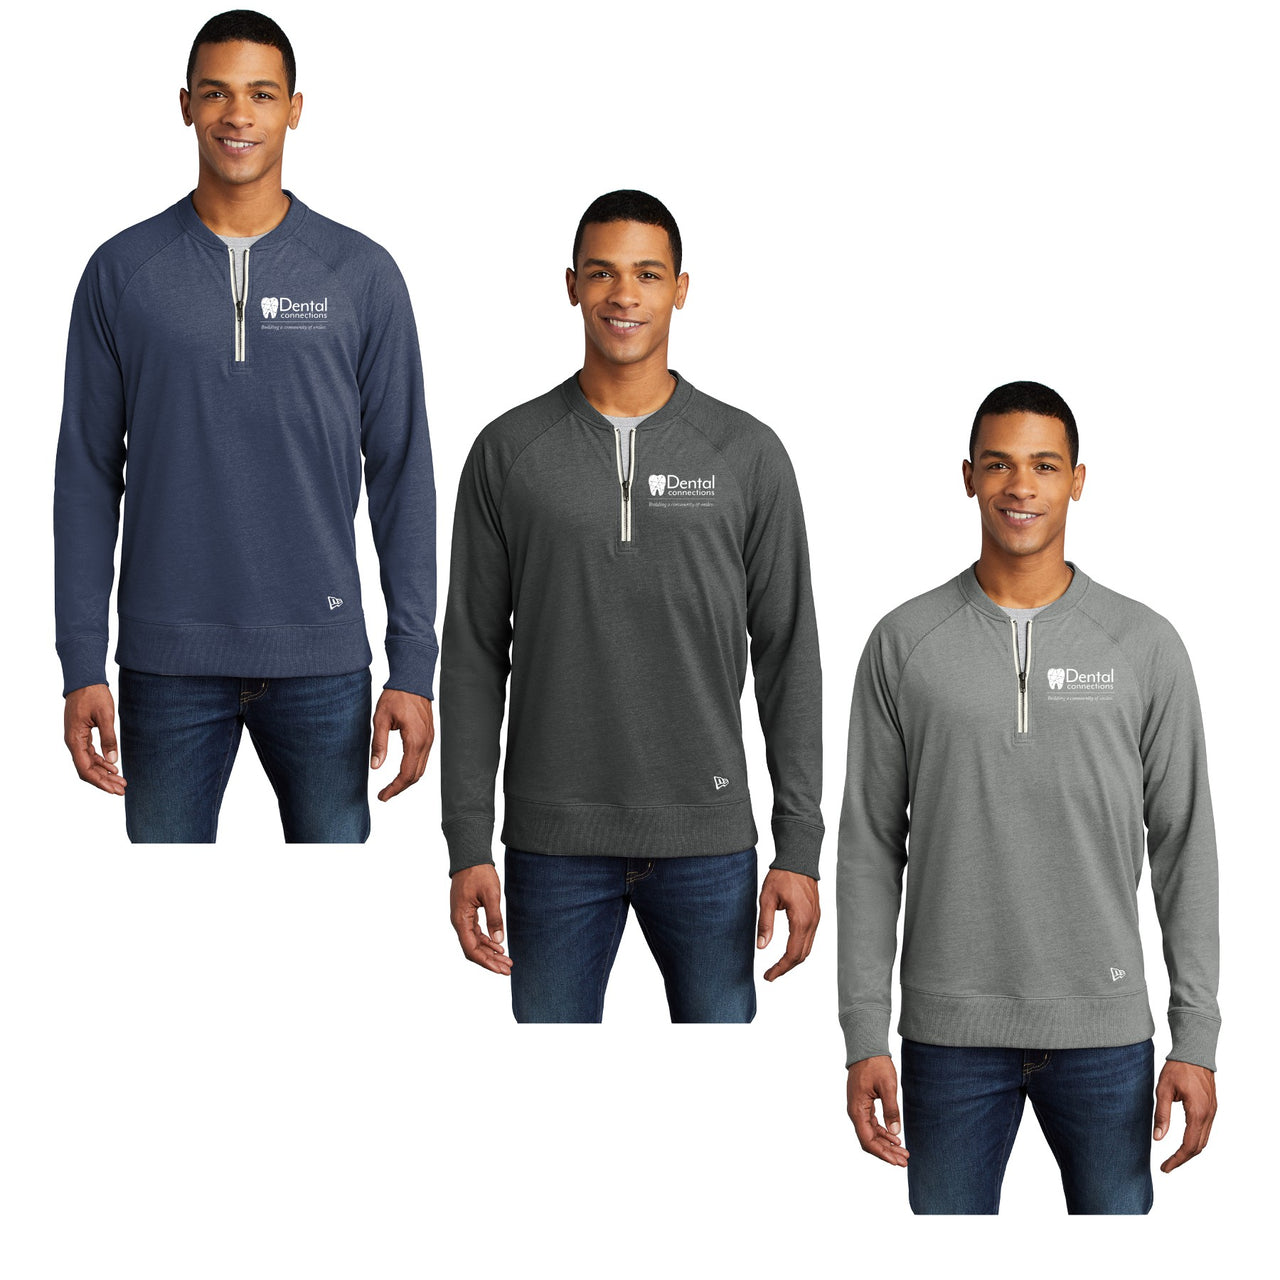 Adult - New Era Sueded Cotton Blend 1/4 Zip - (Dental Connections)